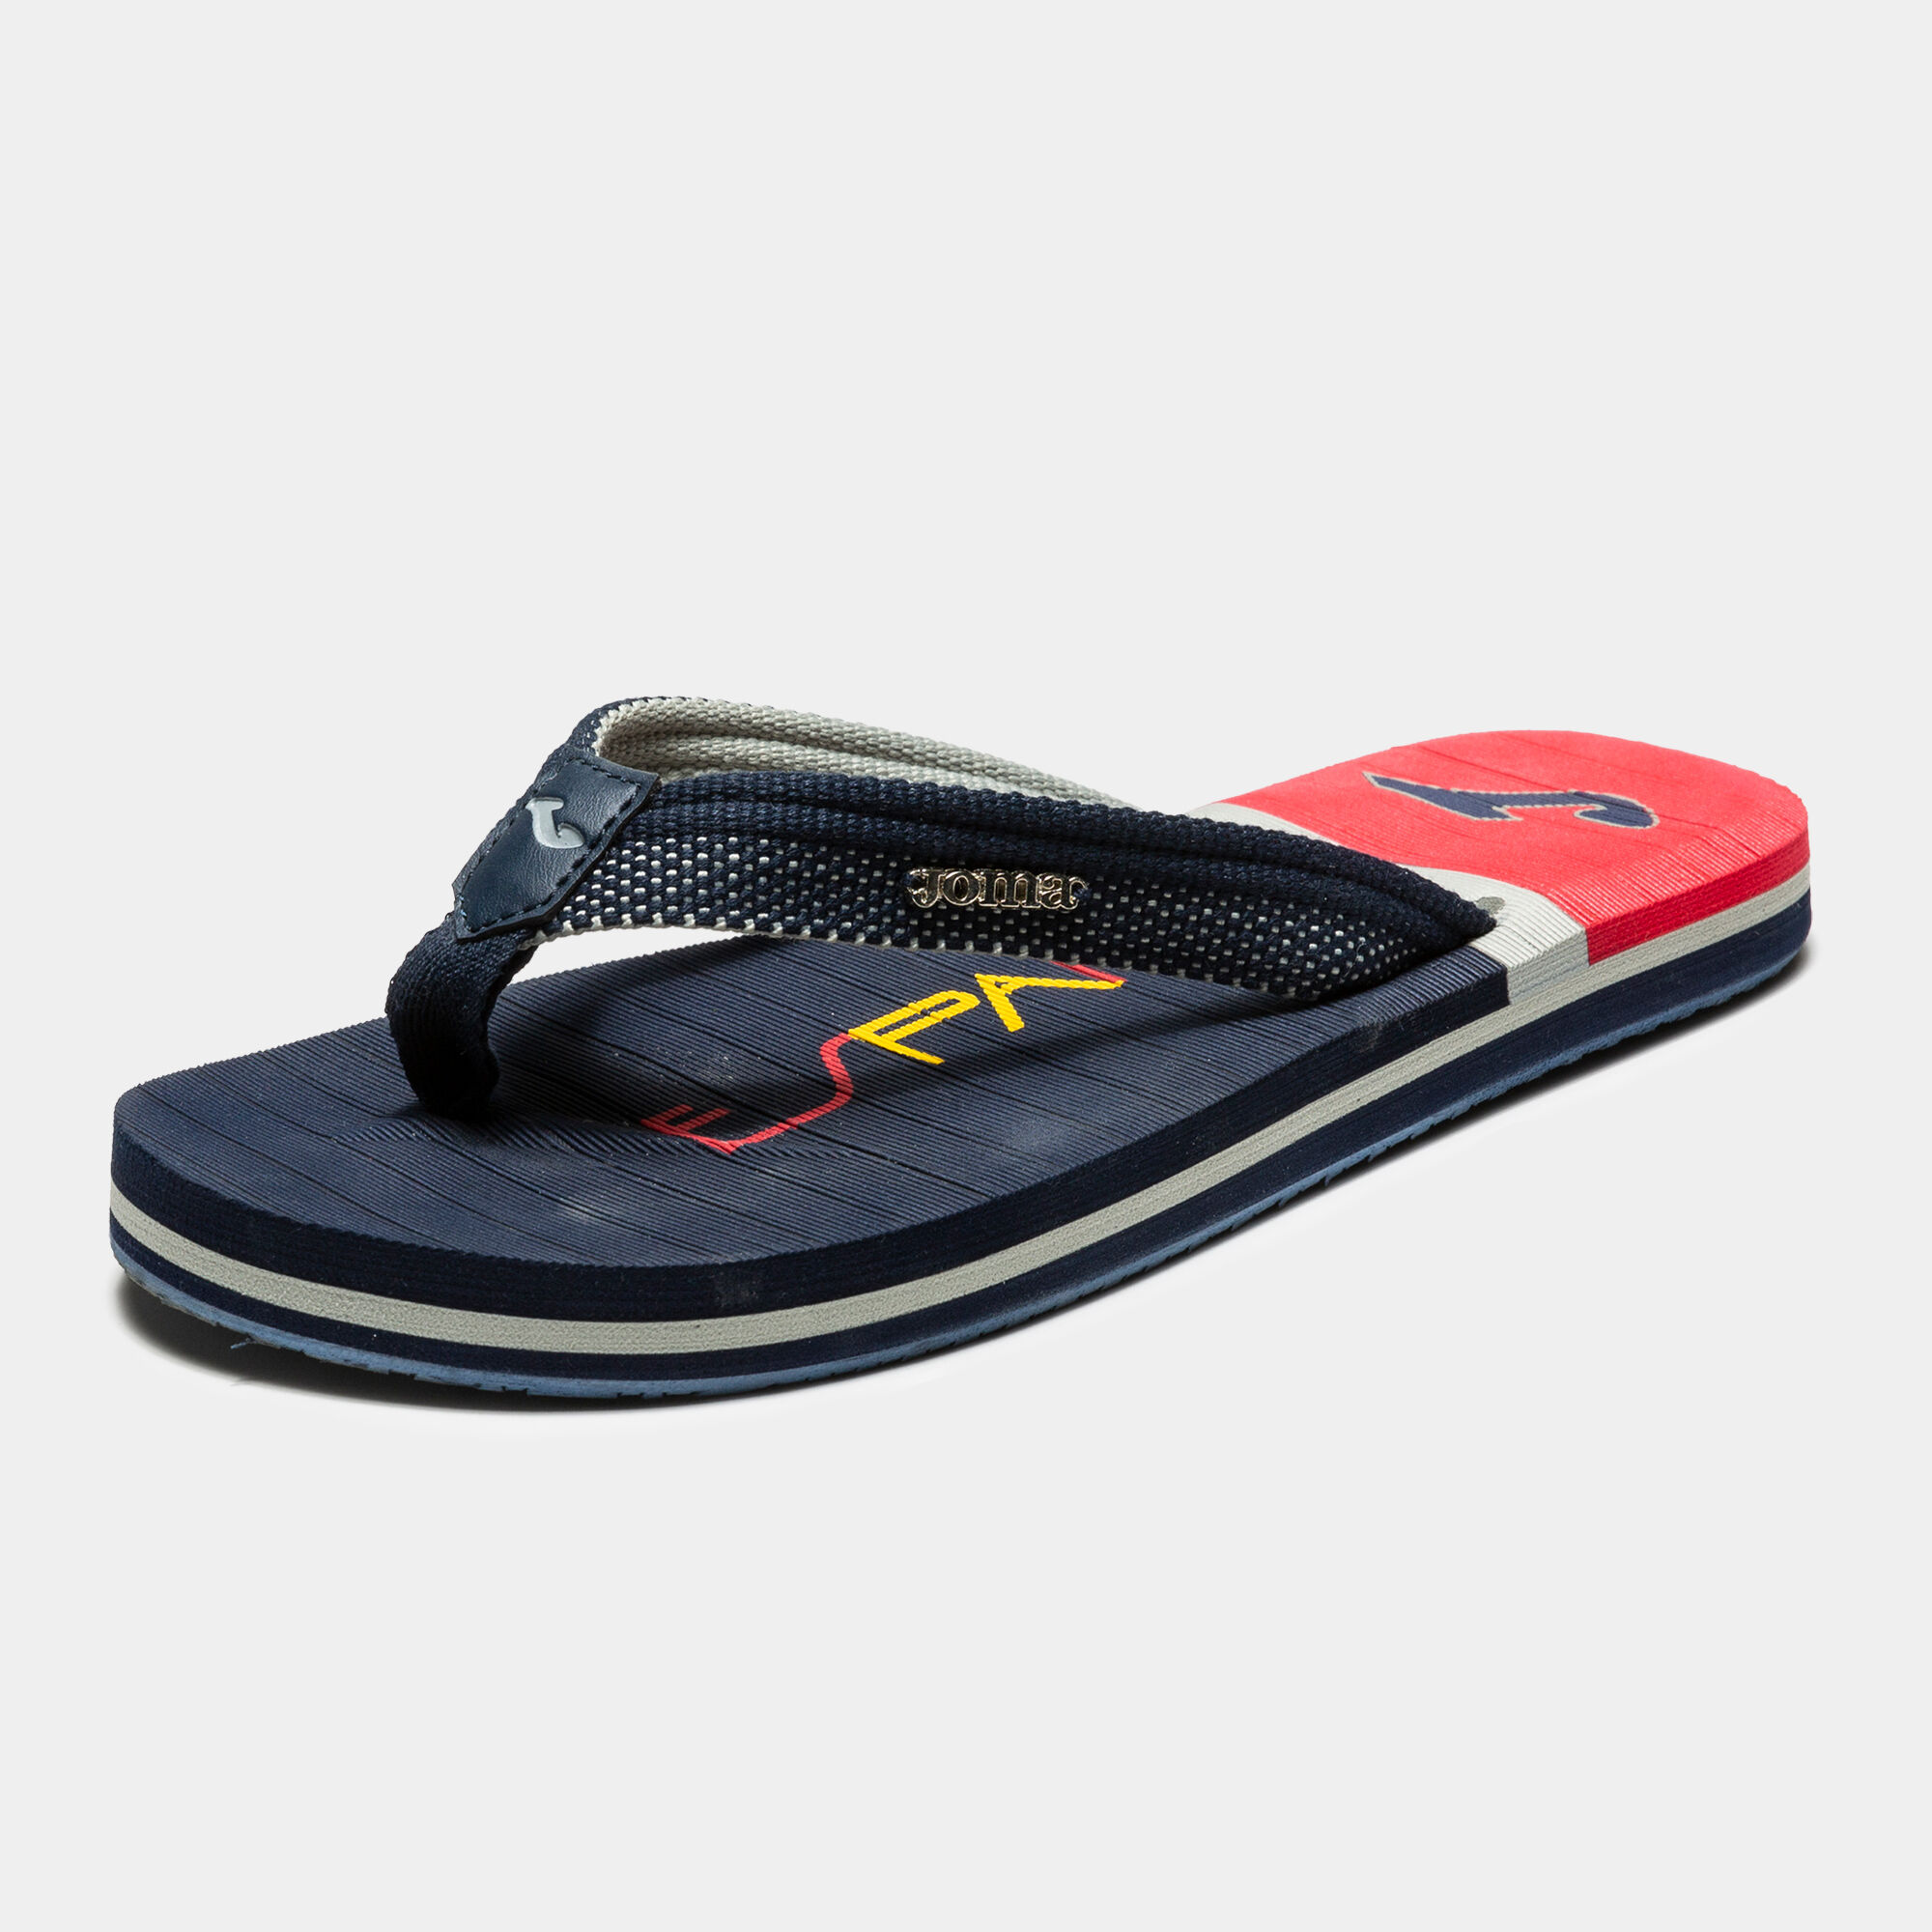 CASUAL FLIP-FLOPS PLAYA SPANISH OLYMPIC COMMITTEE WOMAN NAVY BLUE RED